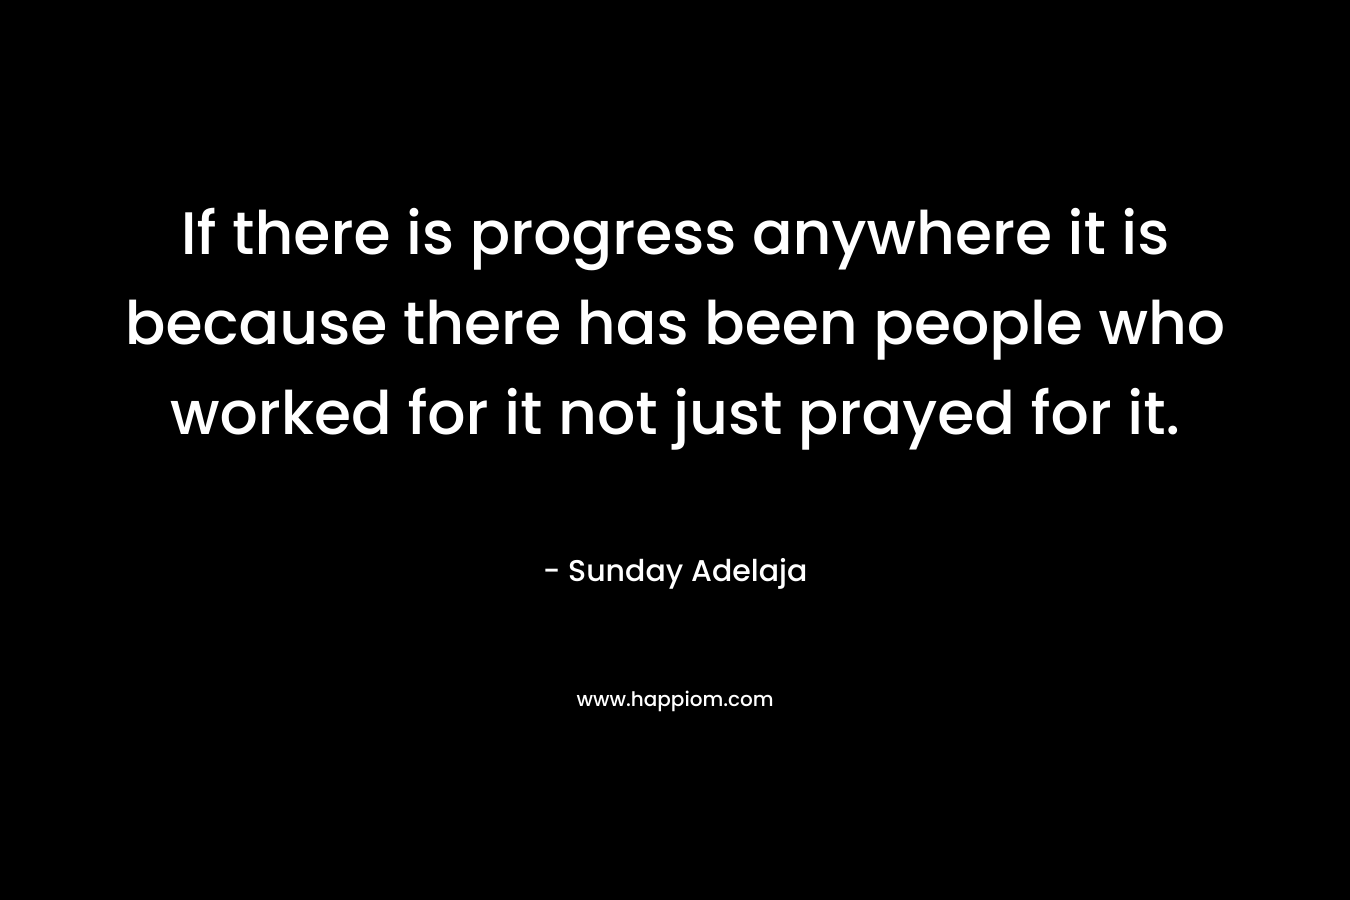 If there is progress anywhere it is because there has been people who worked for it not just prayed for it.